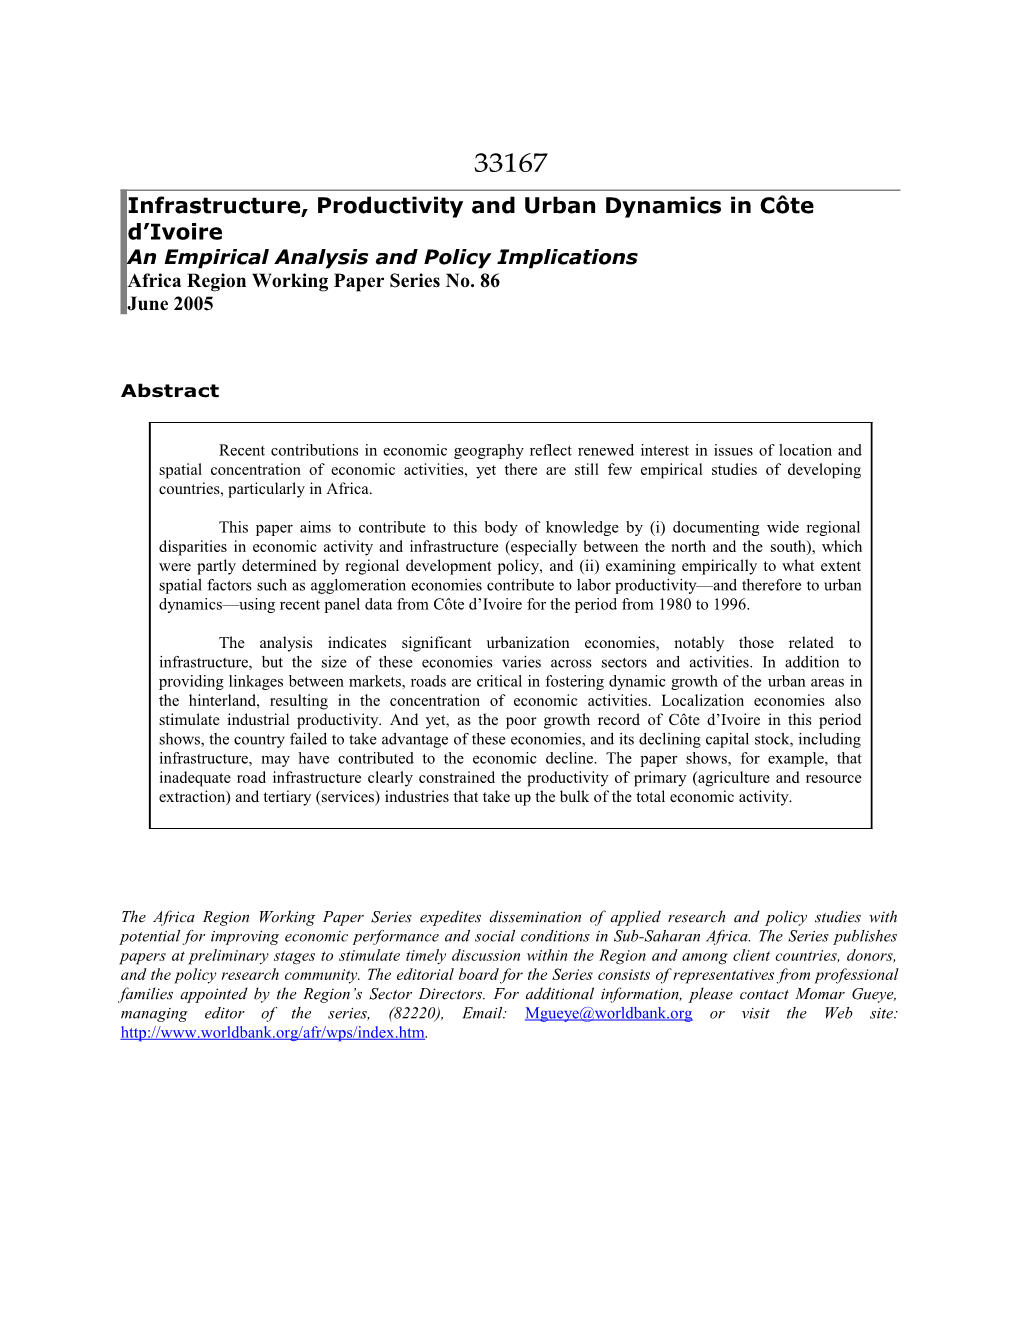 Infrastructure, Productivity and Urban Dynamics in Côte D Ivoire